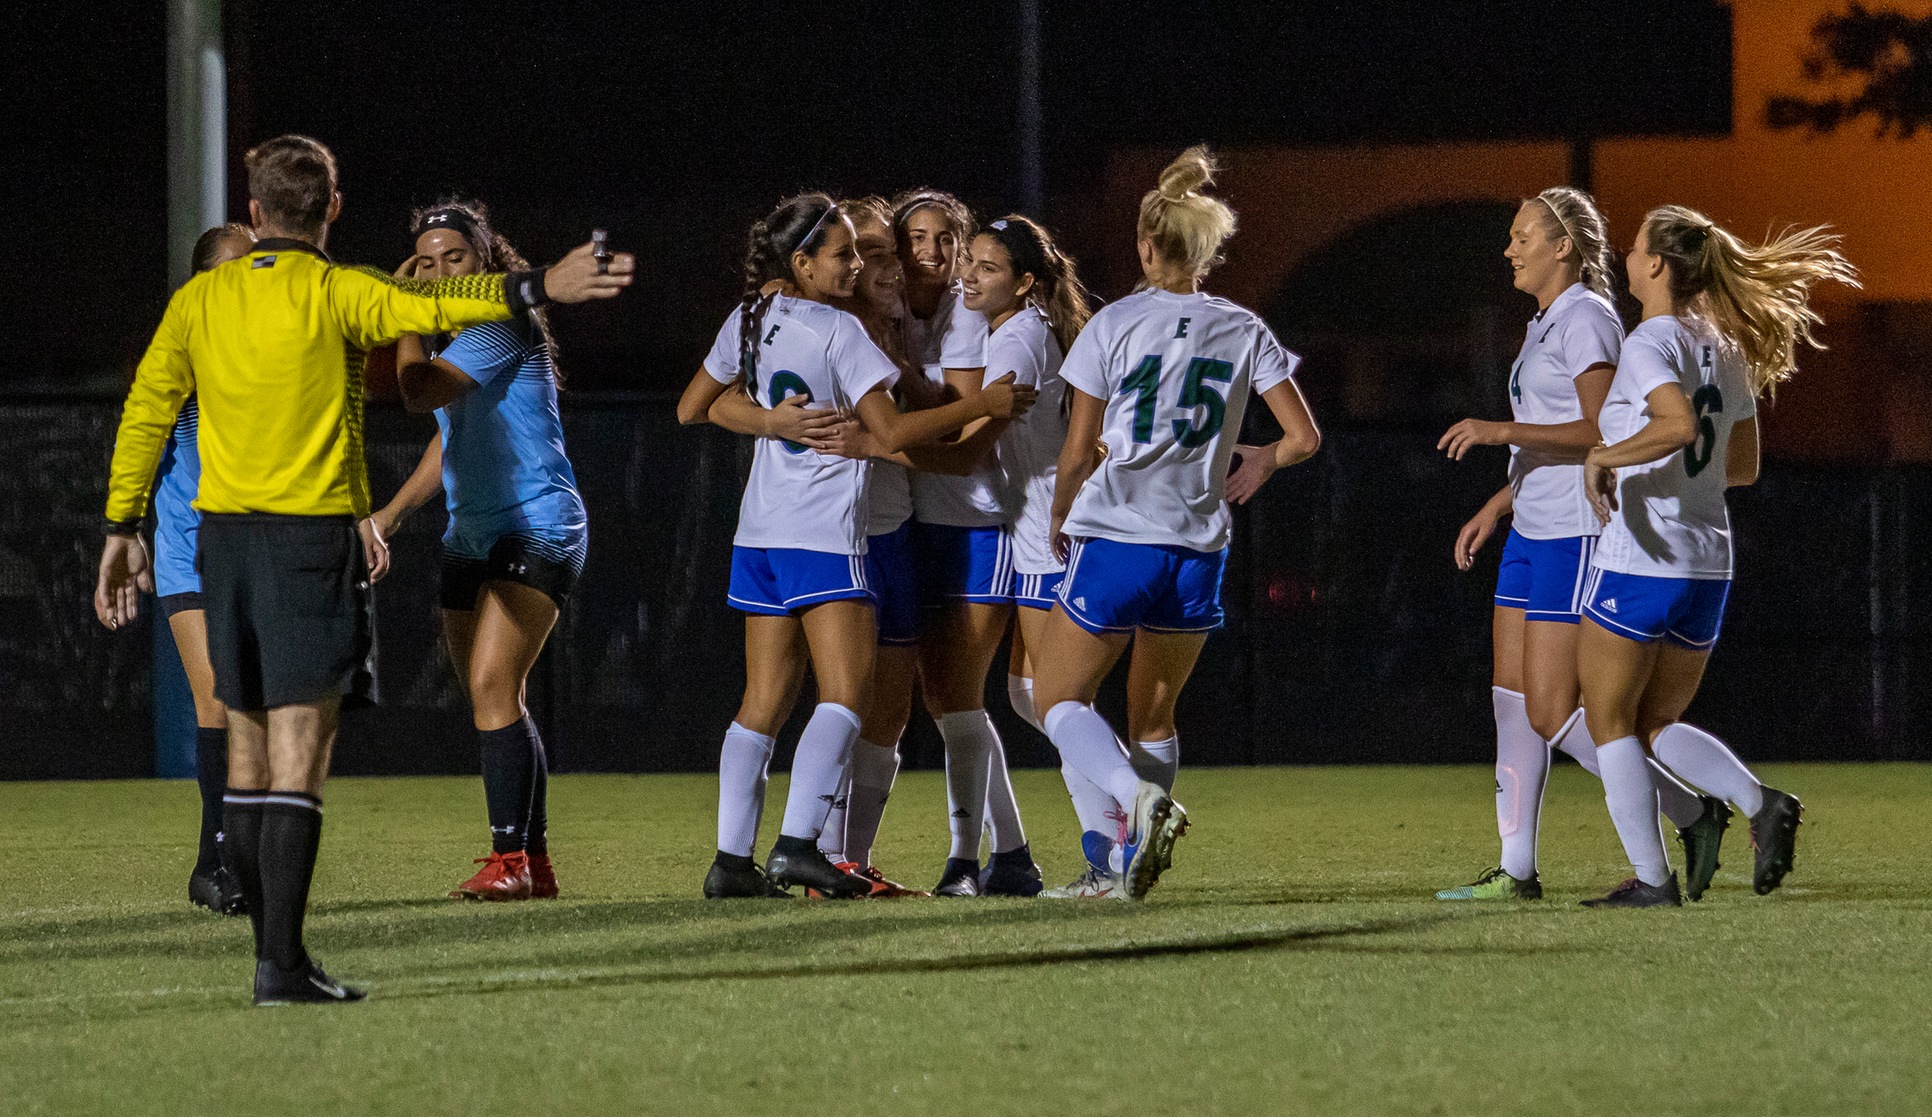 Women's soccer team punches ticket to national tournament semifinals